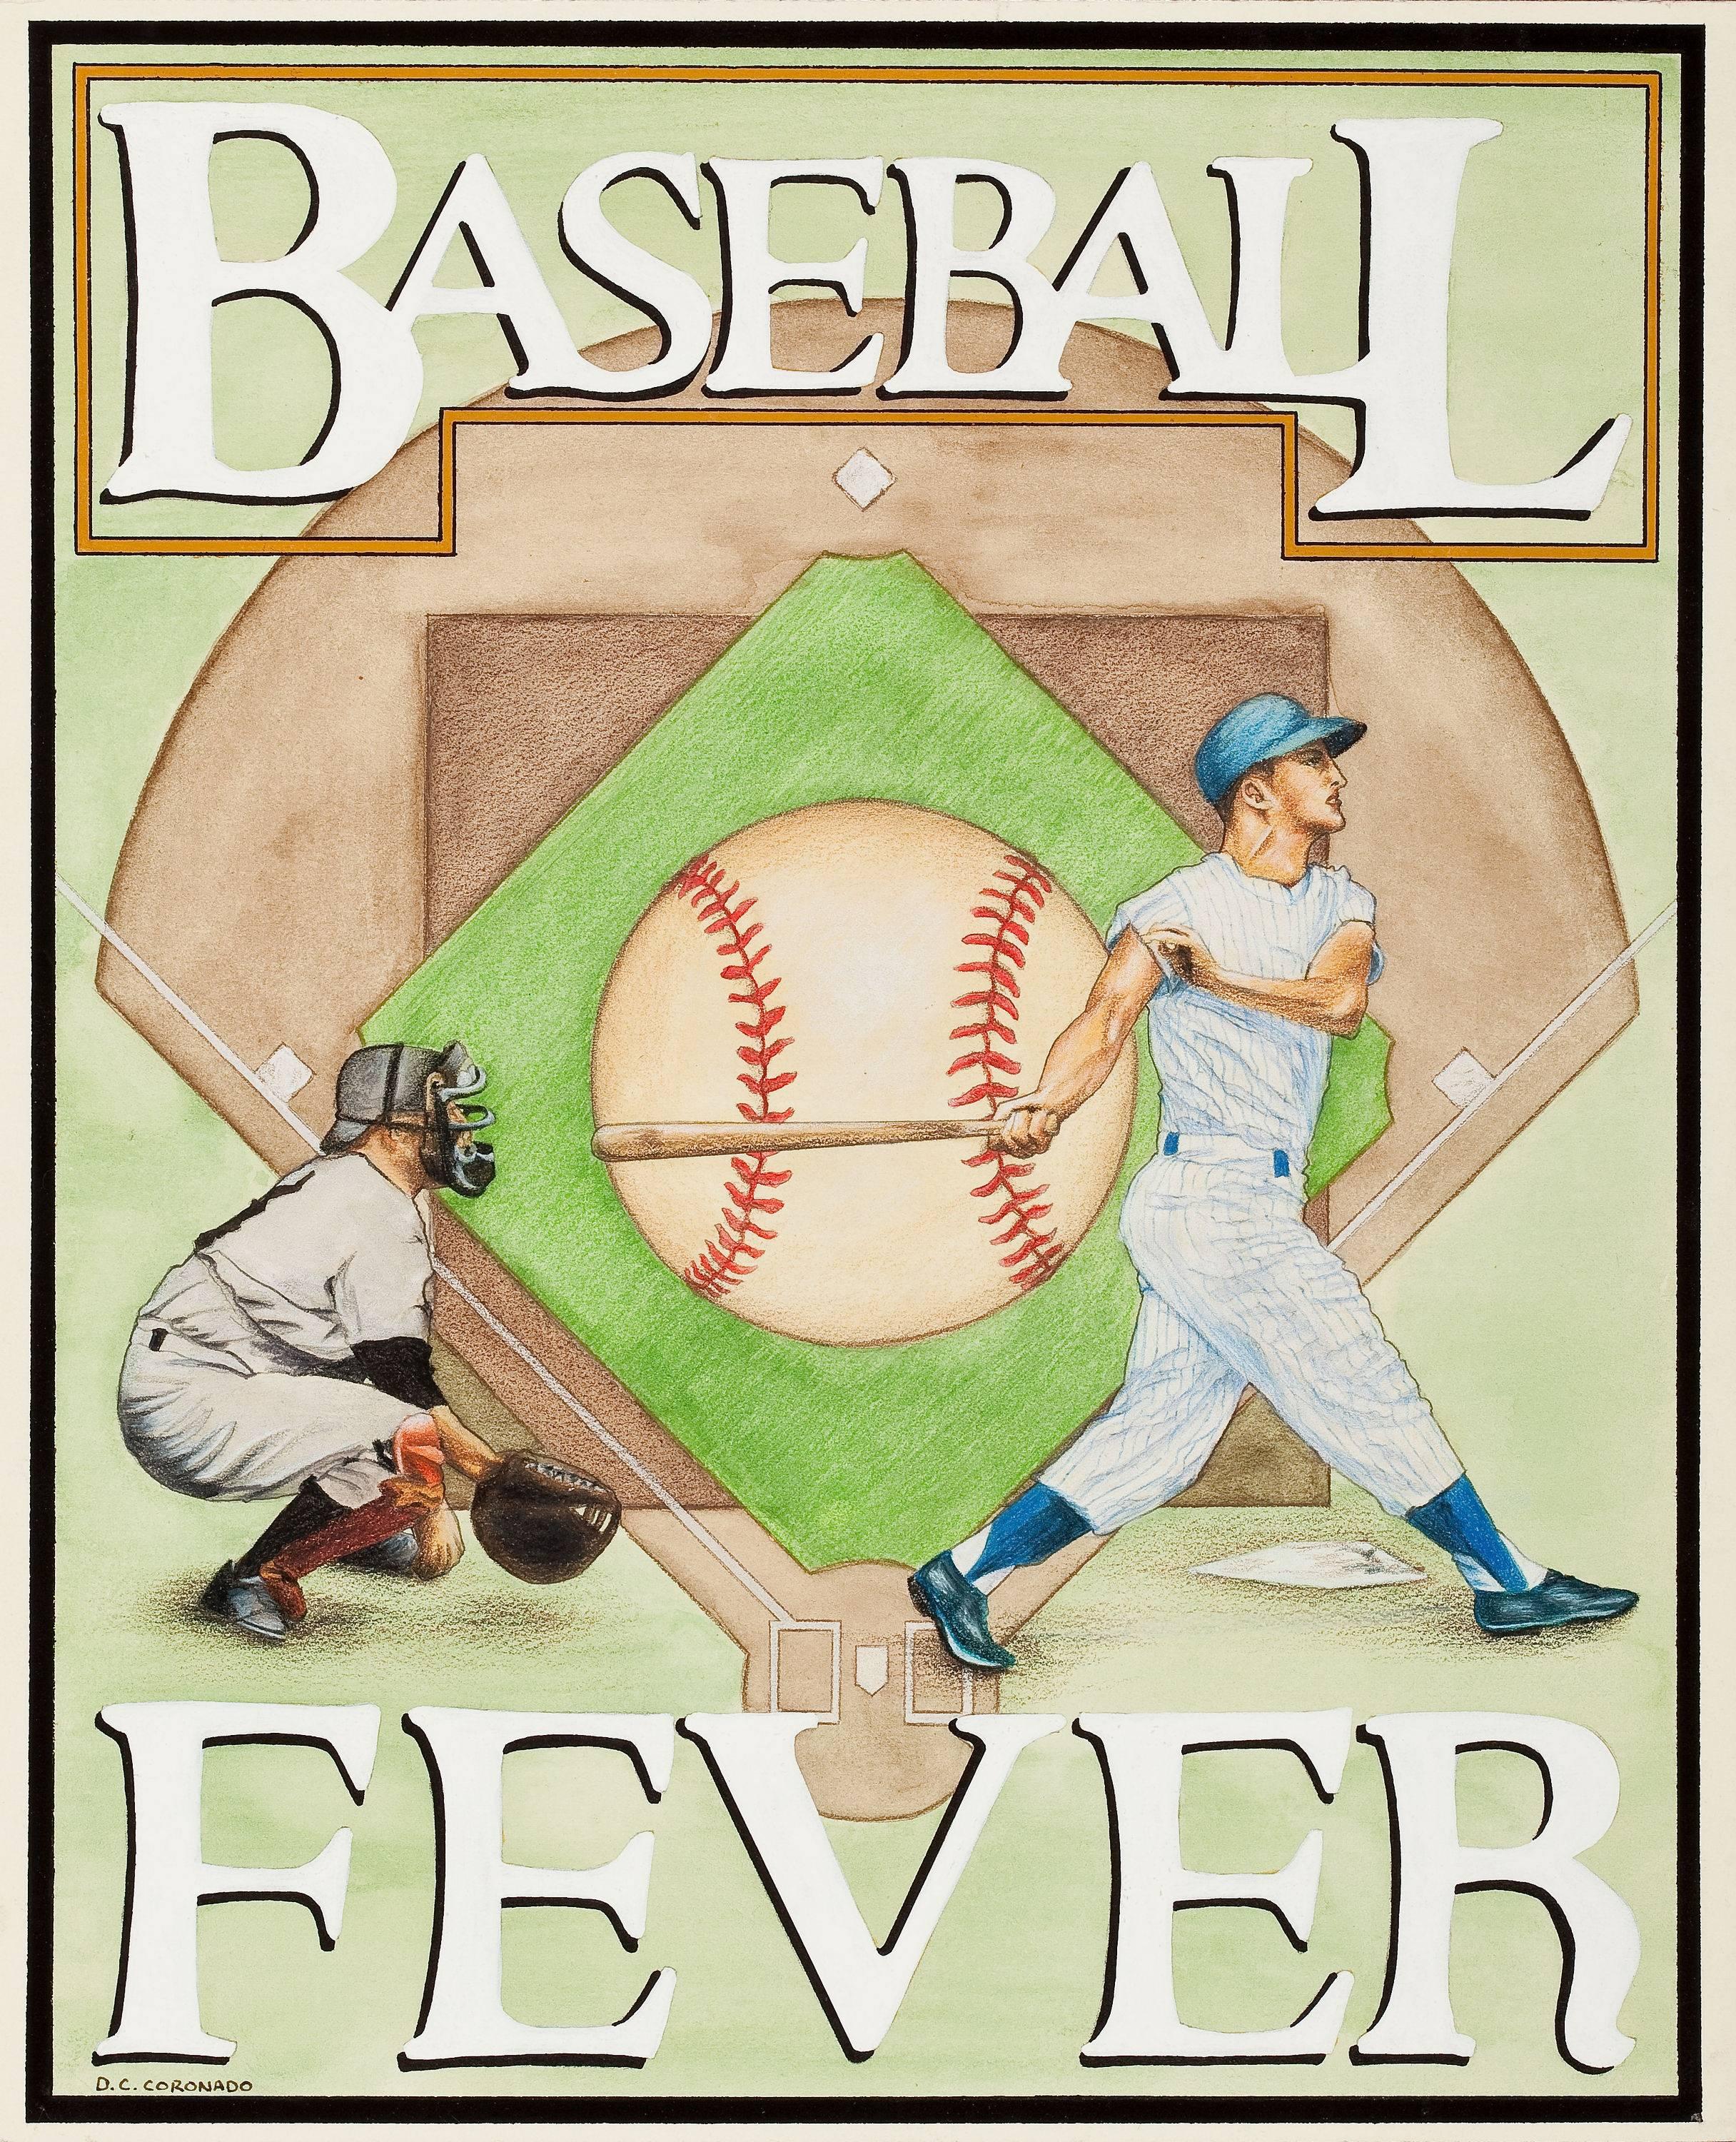 Group of Four: Baseball Themed Illustrations - Painting by Unknown